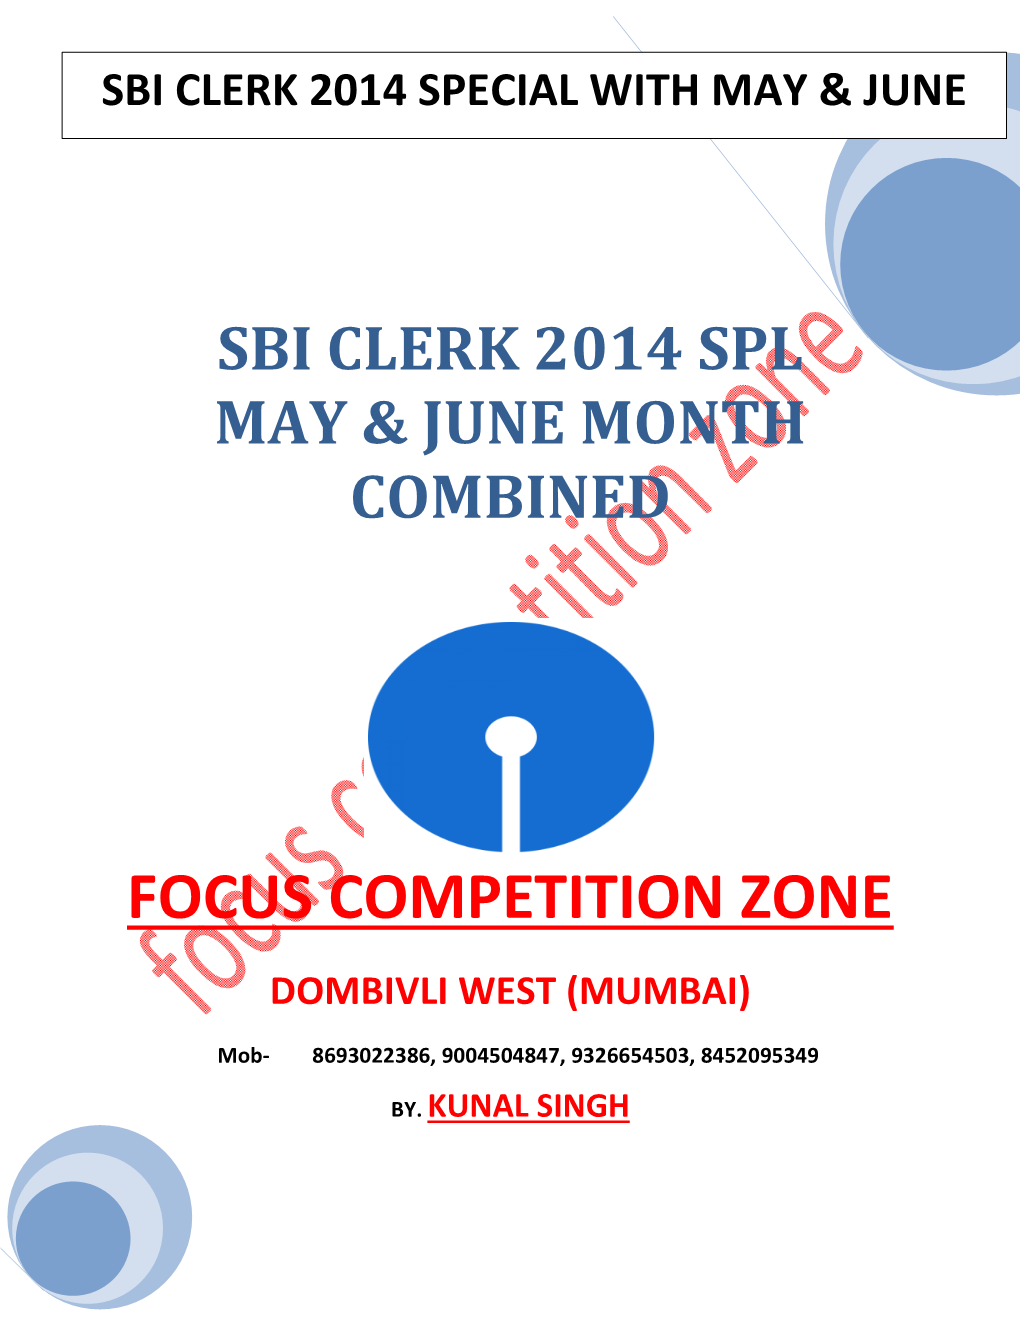 Focus Competition Zone